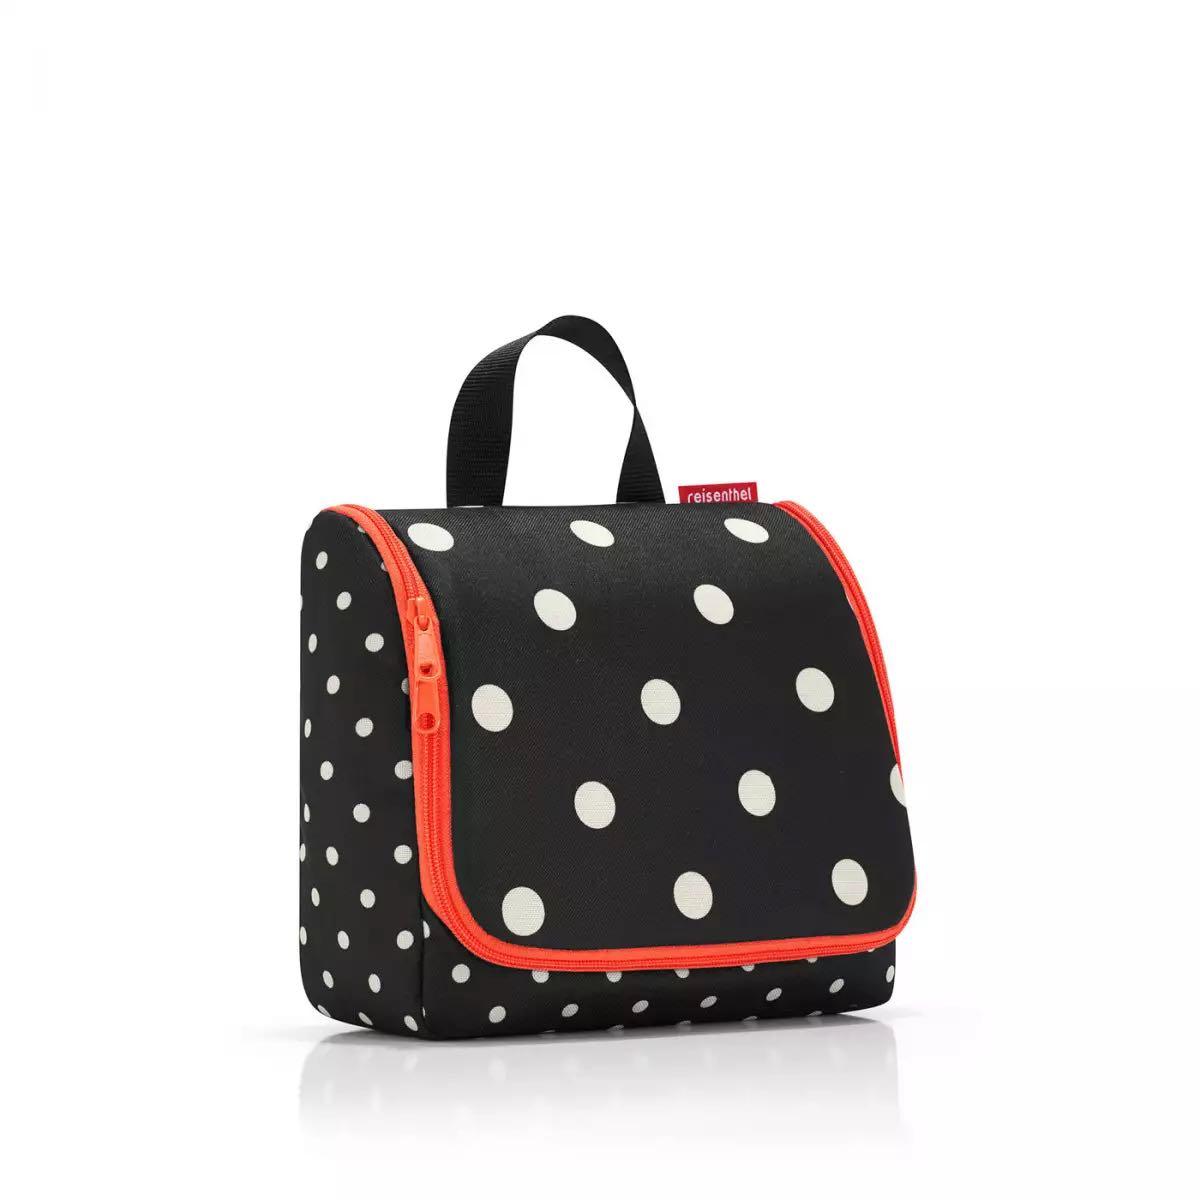 Reisenthel Toiletries Bag Pouch (Black/White/Red Polkadots Mixed Dots), Women's Fashion, Bags & Wallets, Tote Bags on Carousell